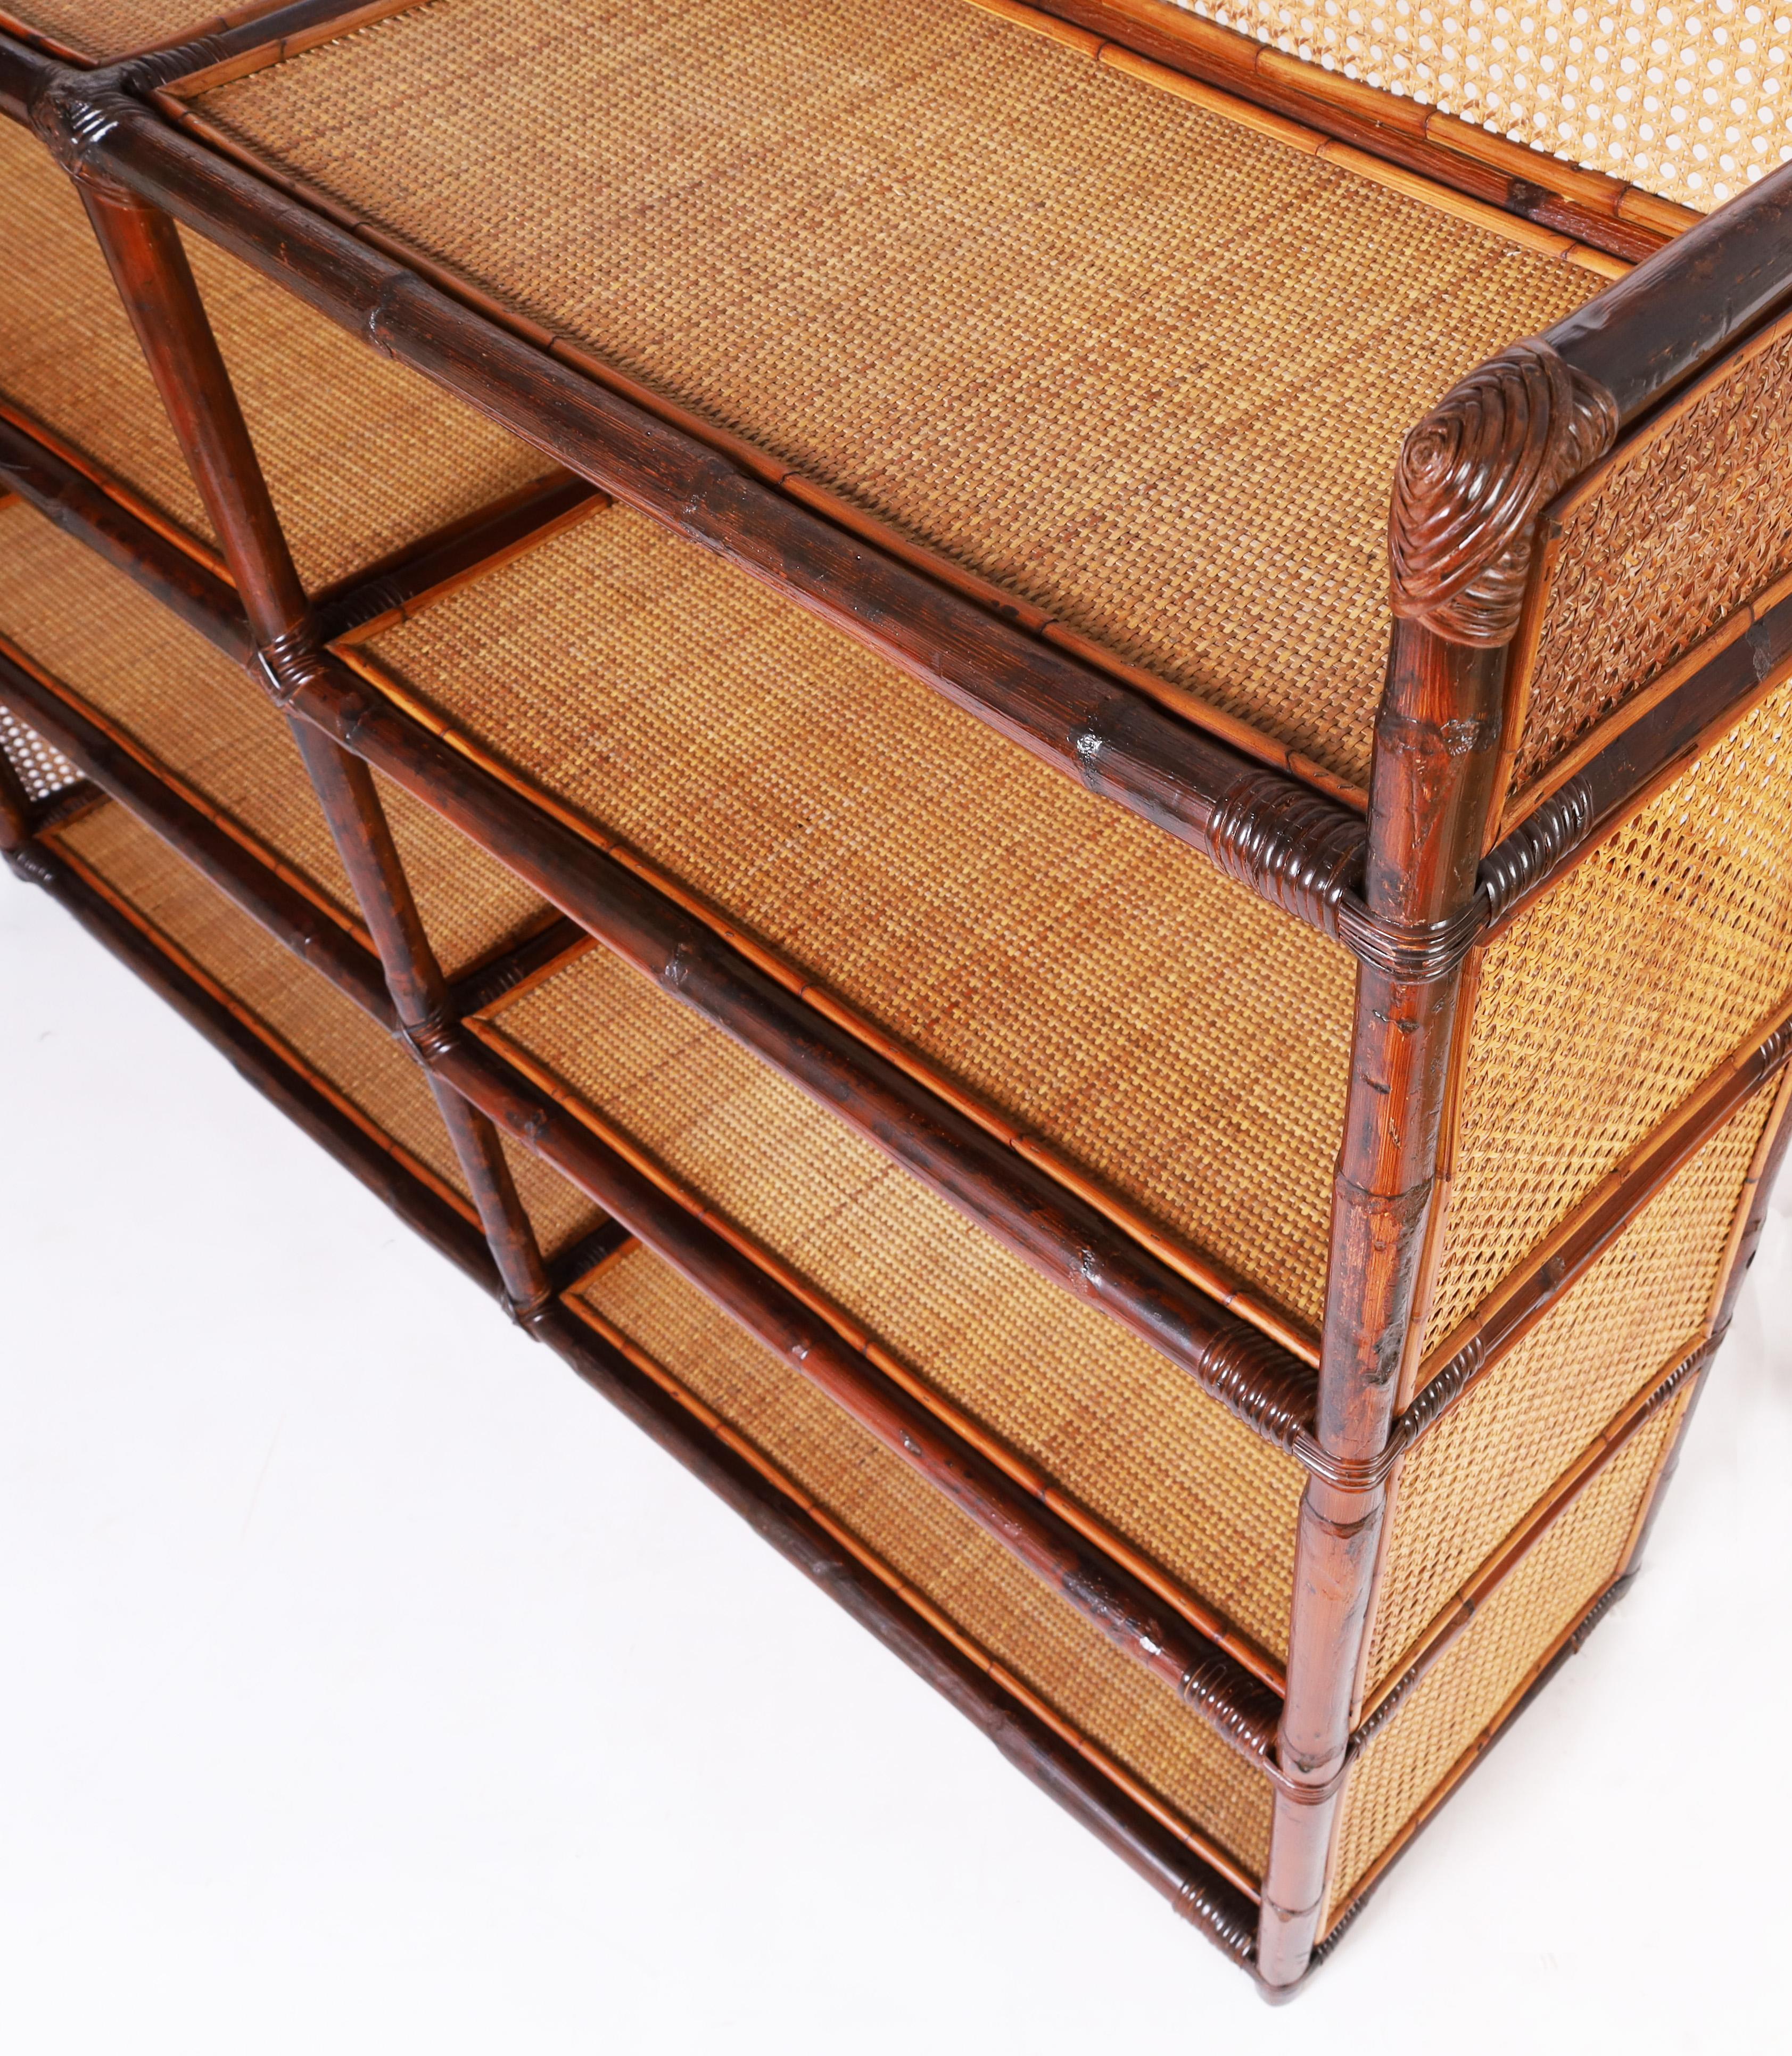 20th Century Caned Bamboo and Grasscloth Etagere or Bookshelf For Sale